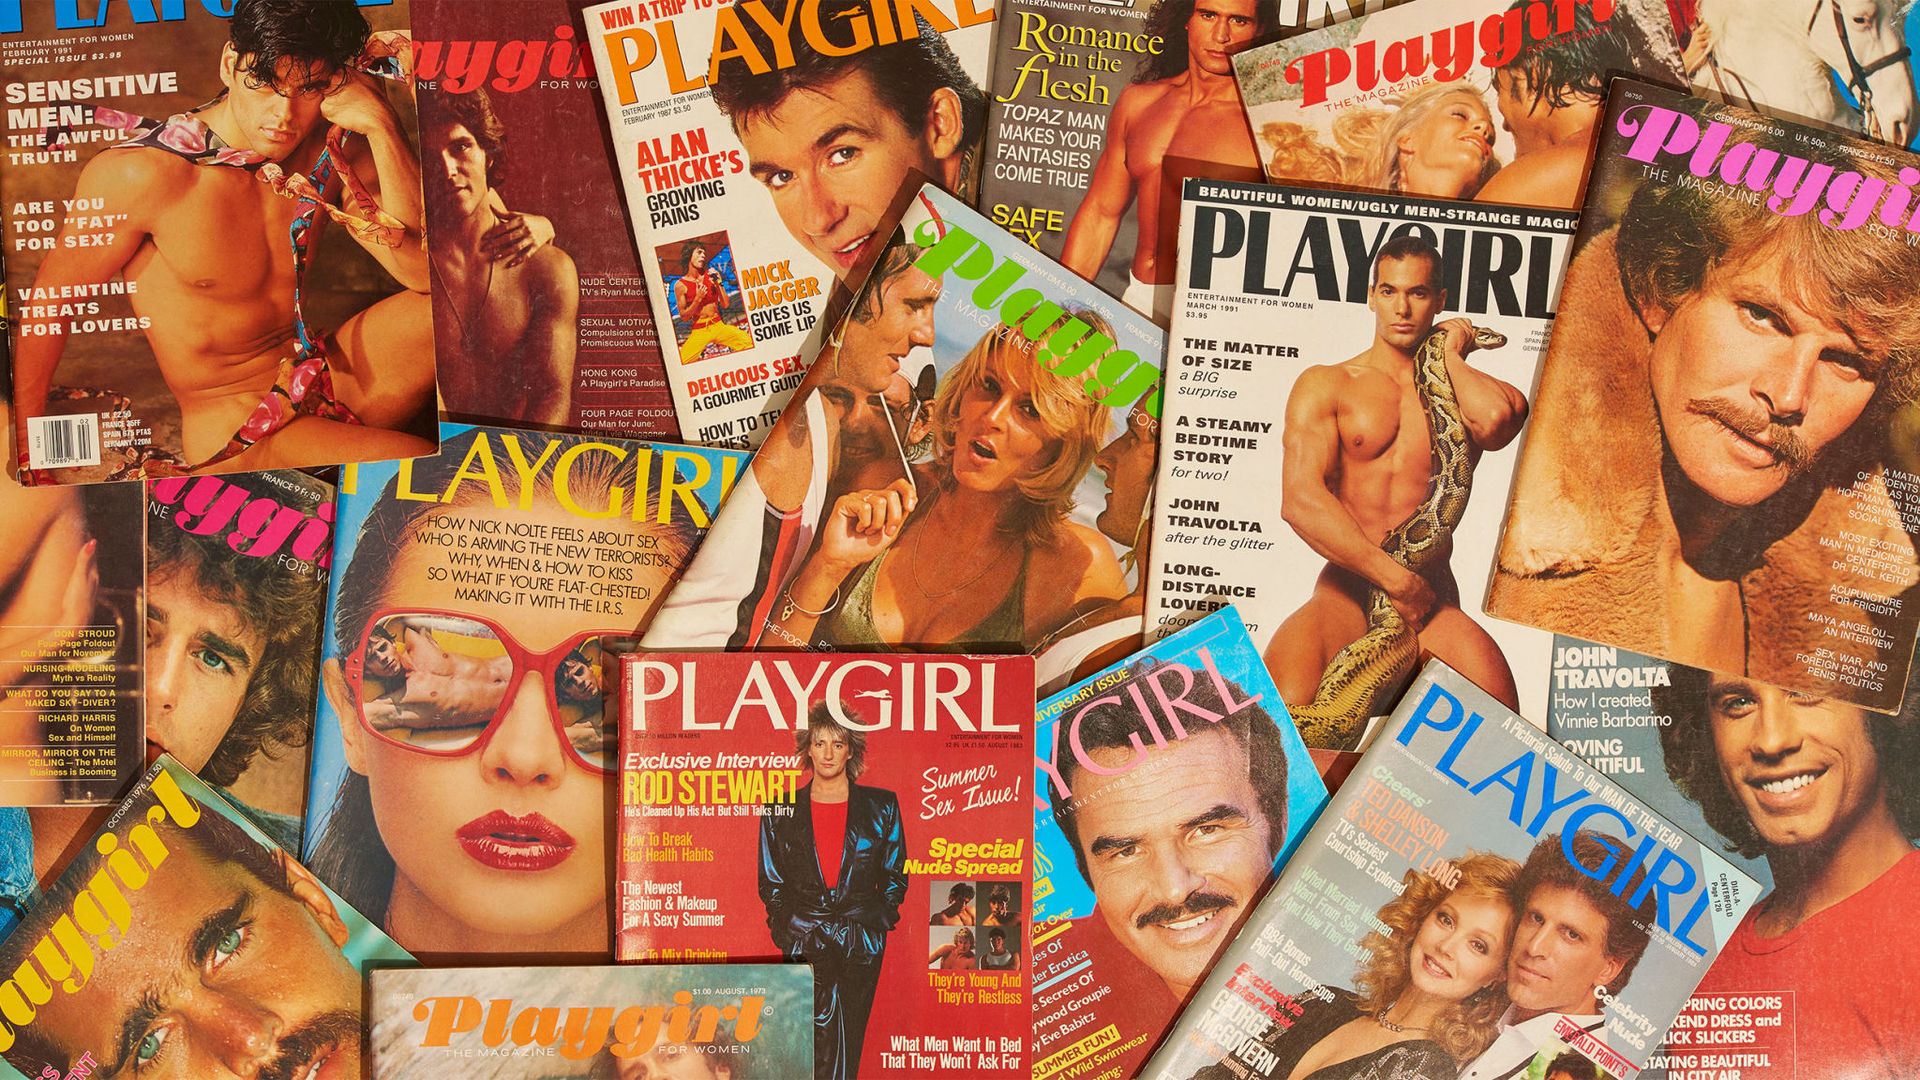 Dowanlod School Bf - History of Playgirl Magazine - How Playgirl Normalized Male Nudity